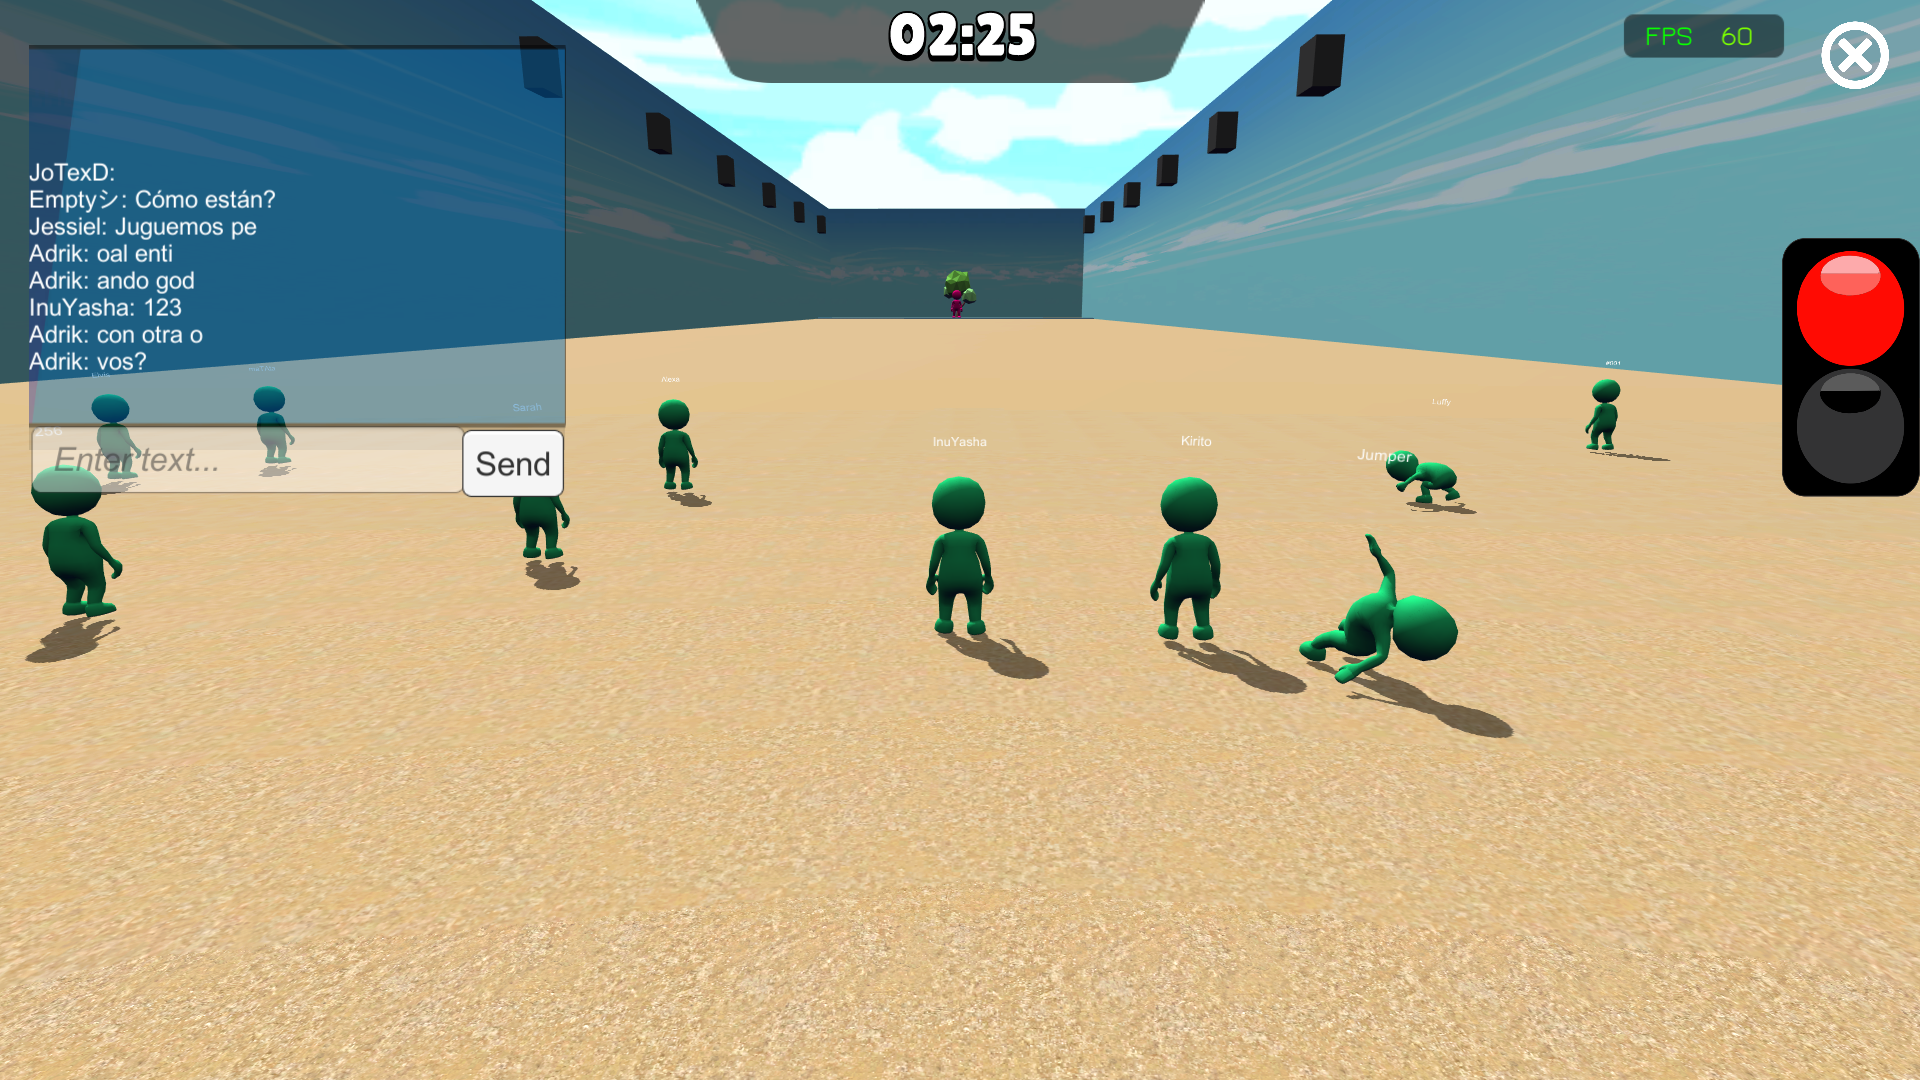 Squid Game Roblox for Android - Download